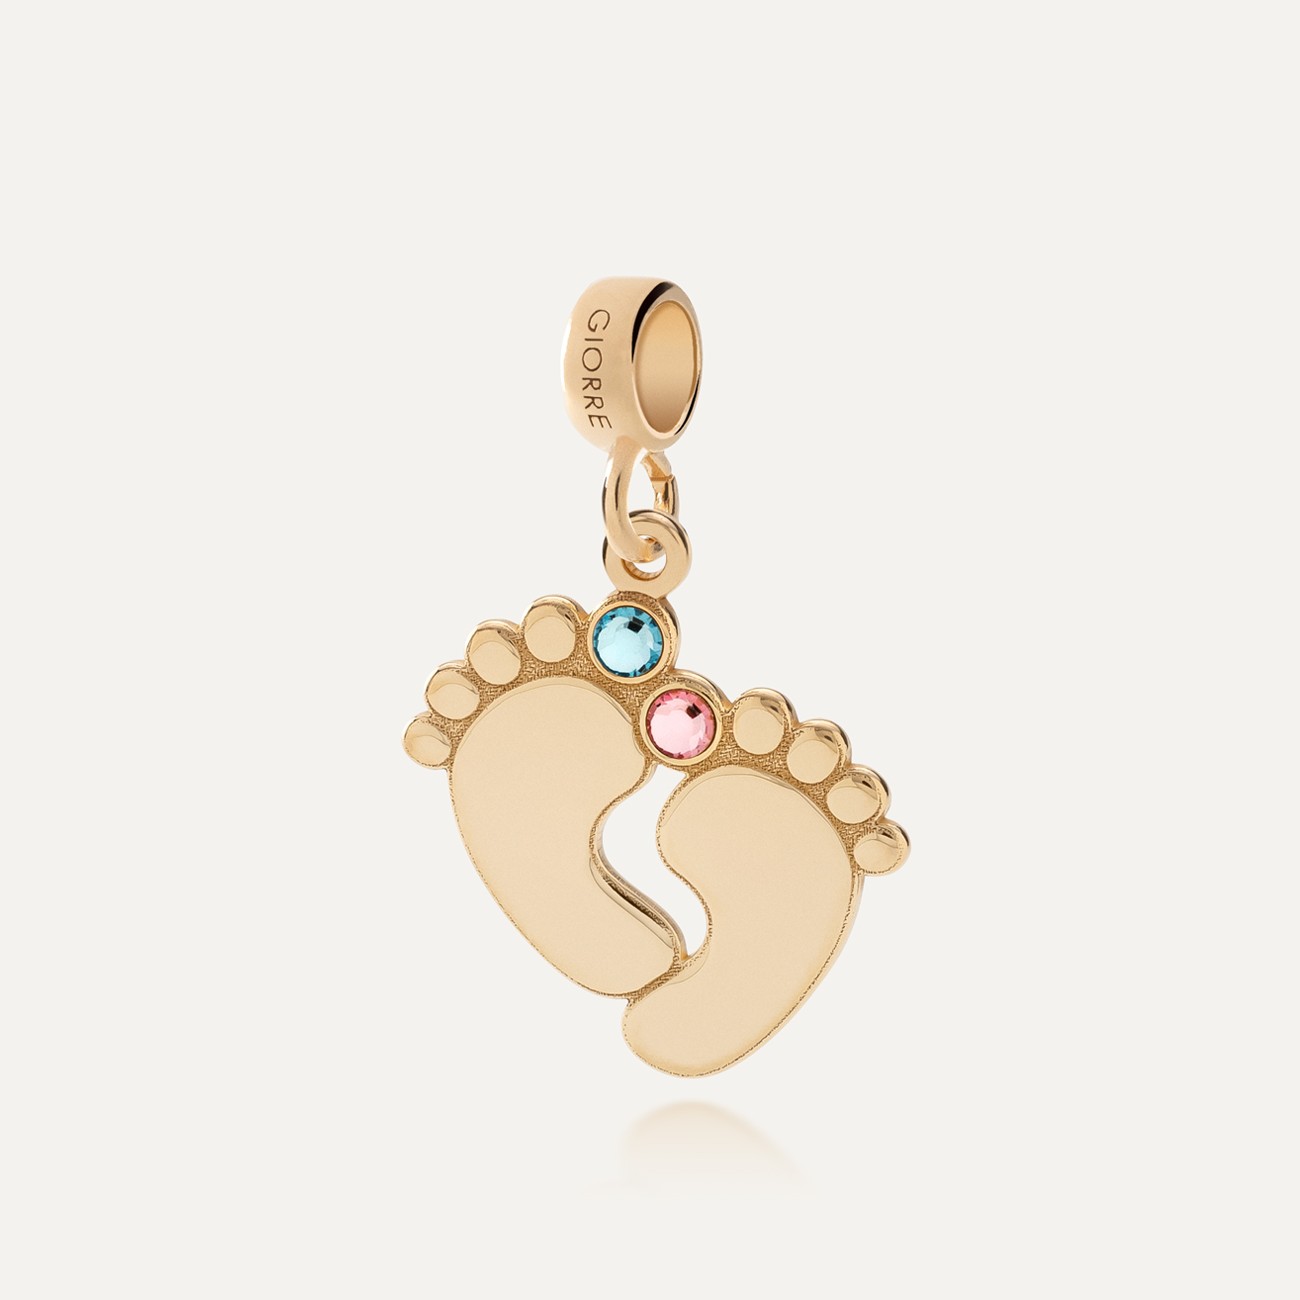 CHARM 43, BABY FEET WITH ENGRAVE, STERLING SILVER RHODIUM OR 24K GOLD PLATED